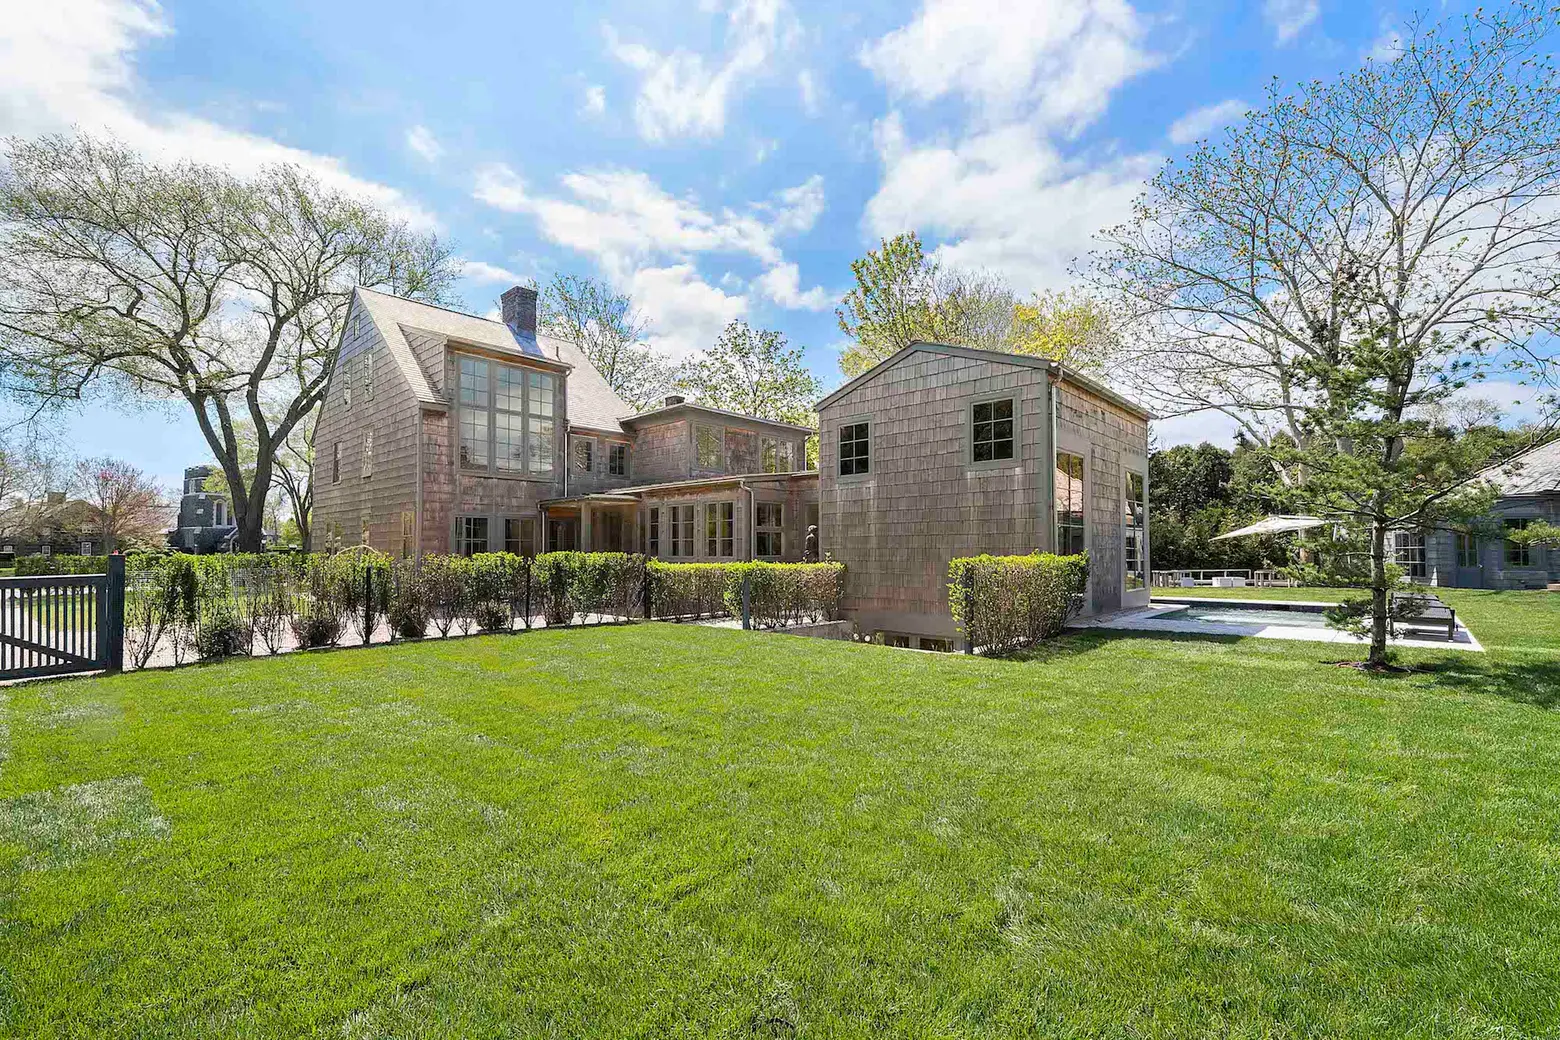 340-year-old East Hampton home reimagined with a modernist design asks $4.5M